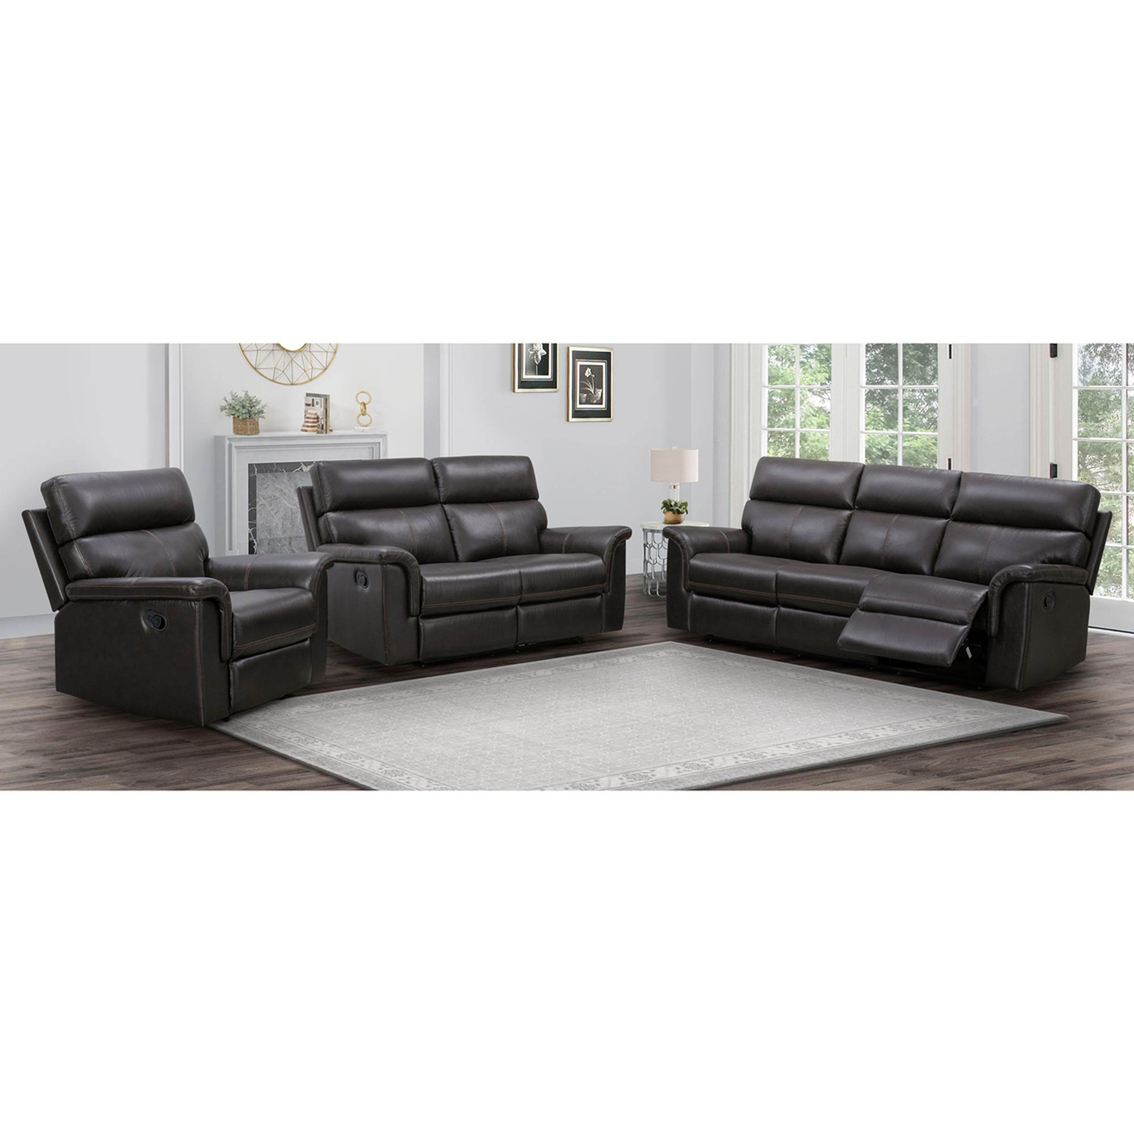 Abbyson Warner Leather 3 Pc. Reclining Set | Sofas & Couches ...